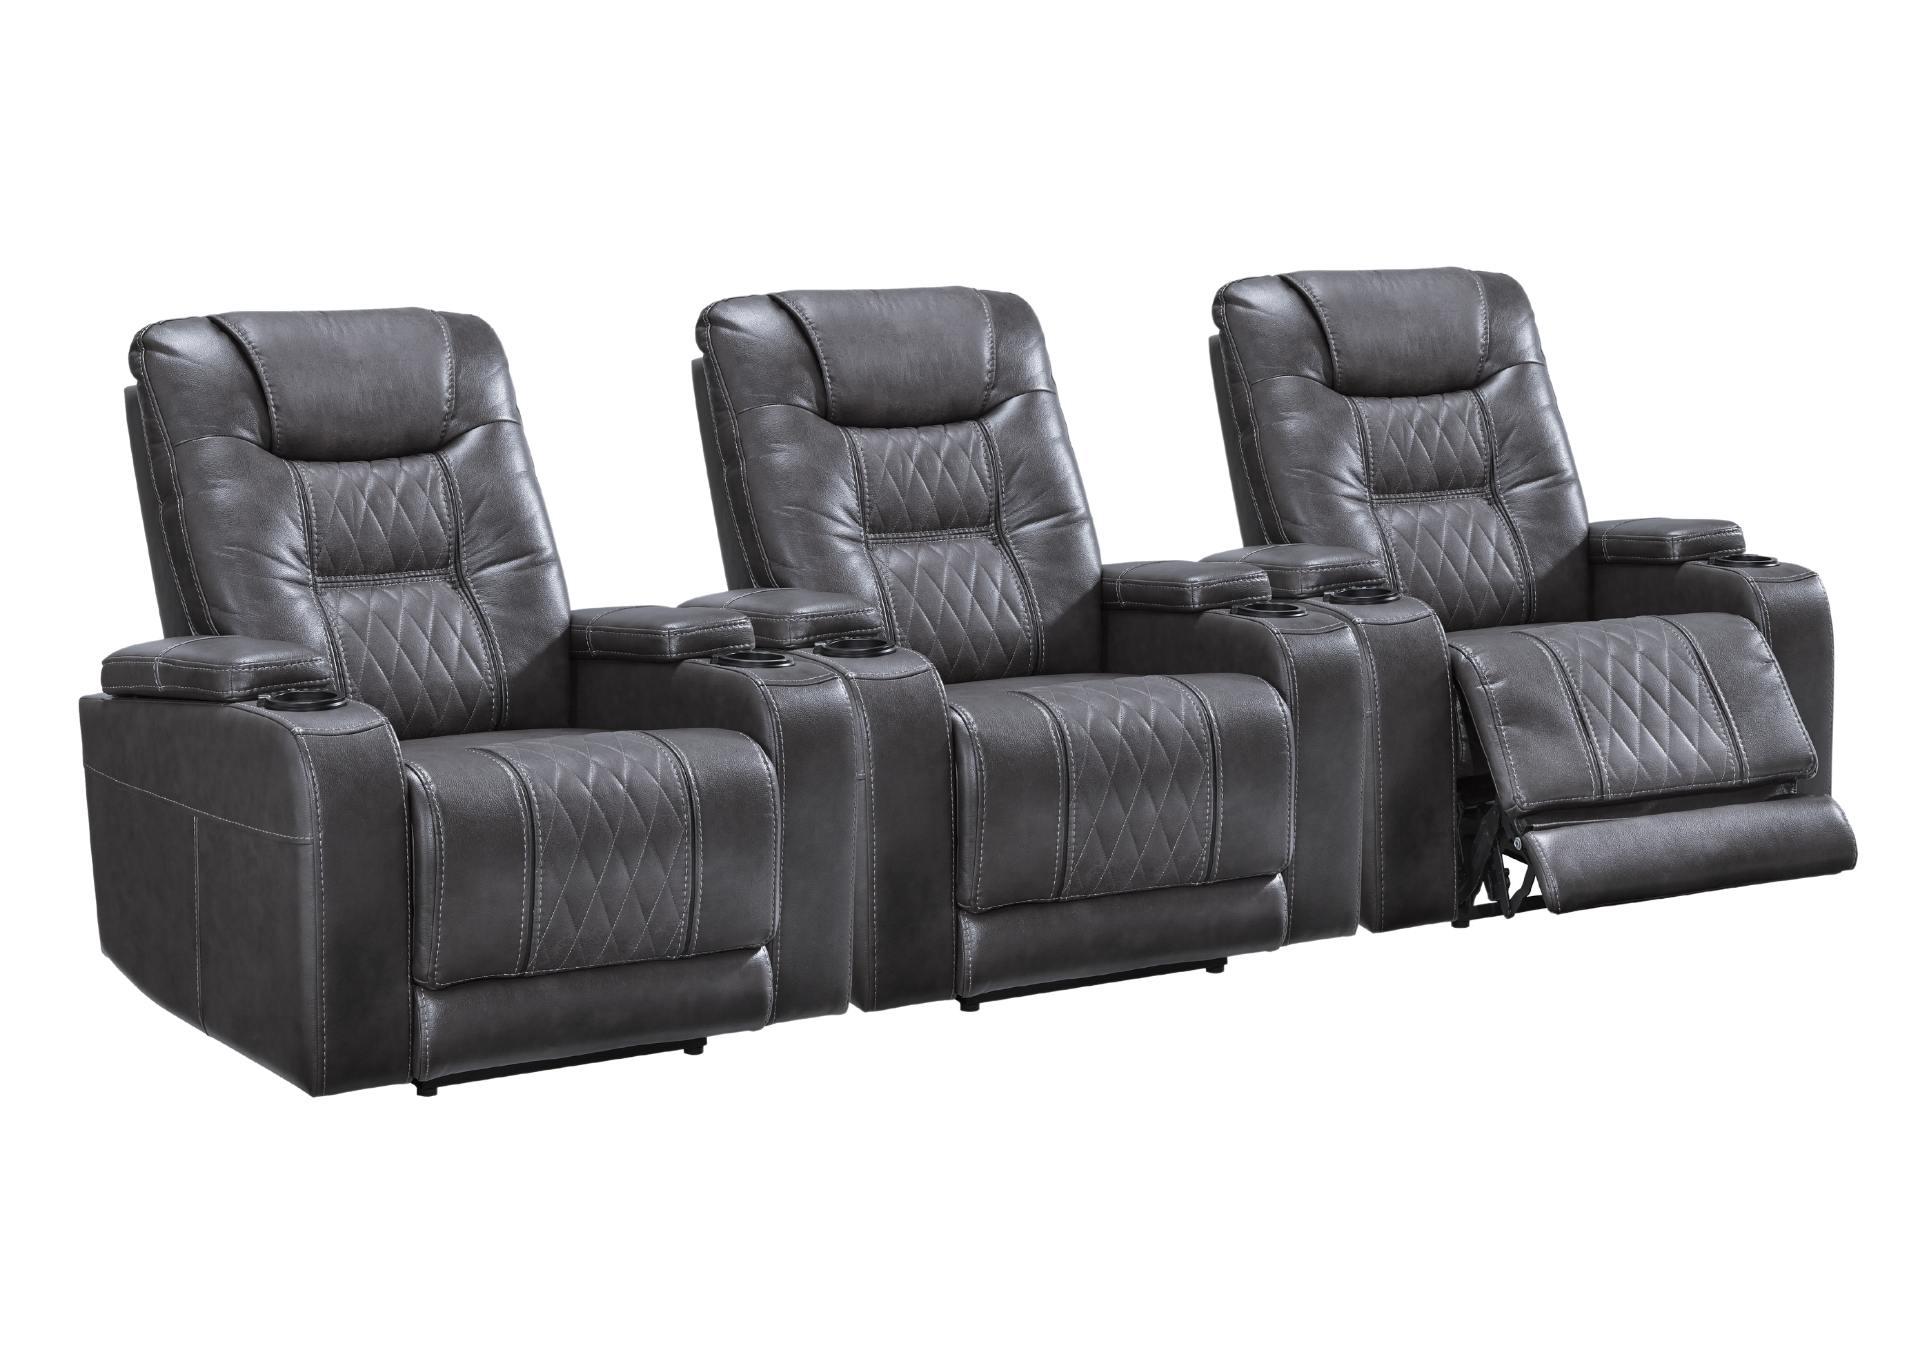 COMPOSER GRAY POWER 3 PIECE THEATER SEATING,ASHLEY FURNITURE INC.